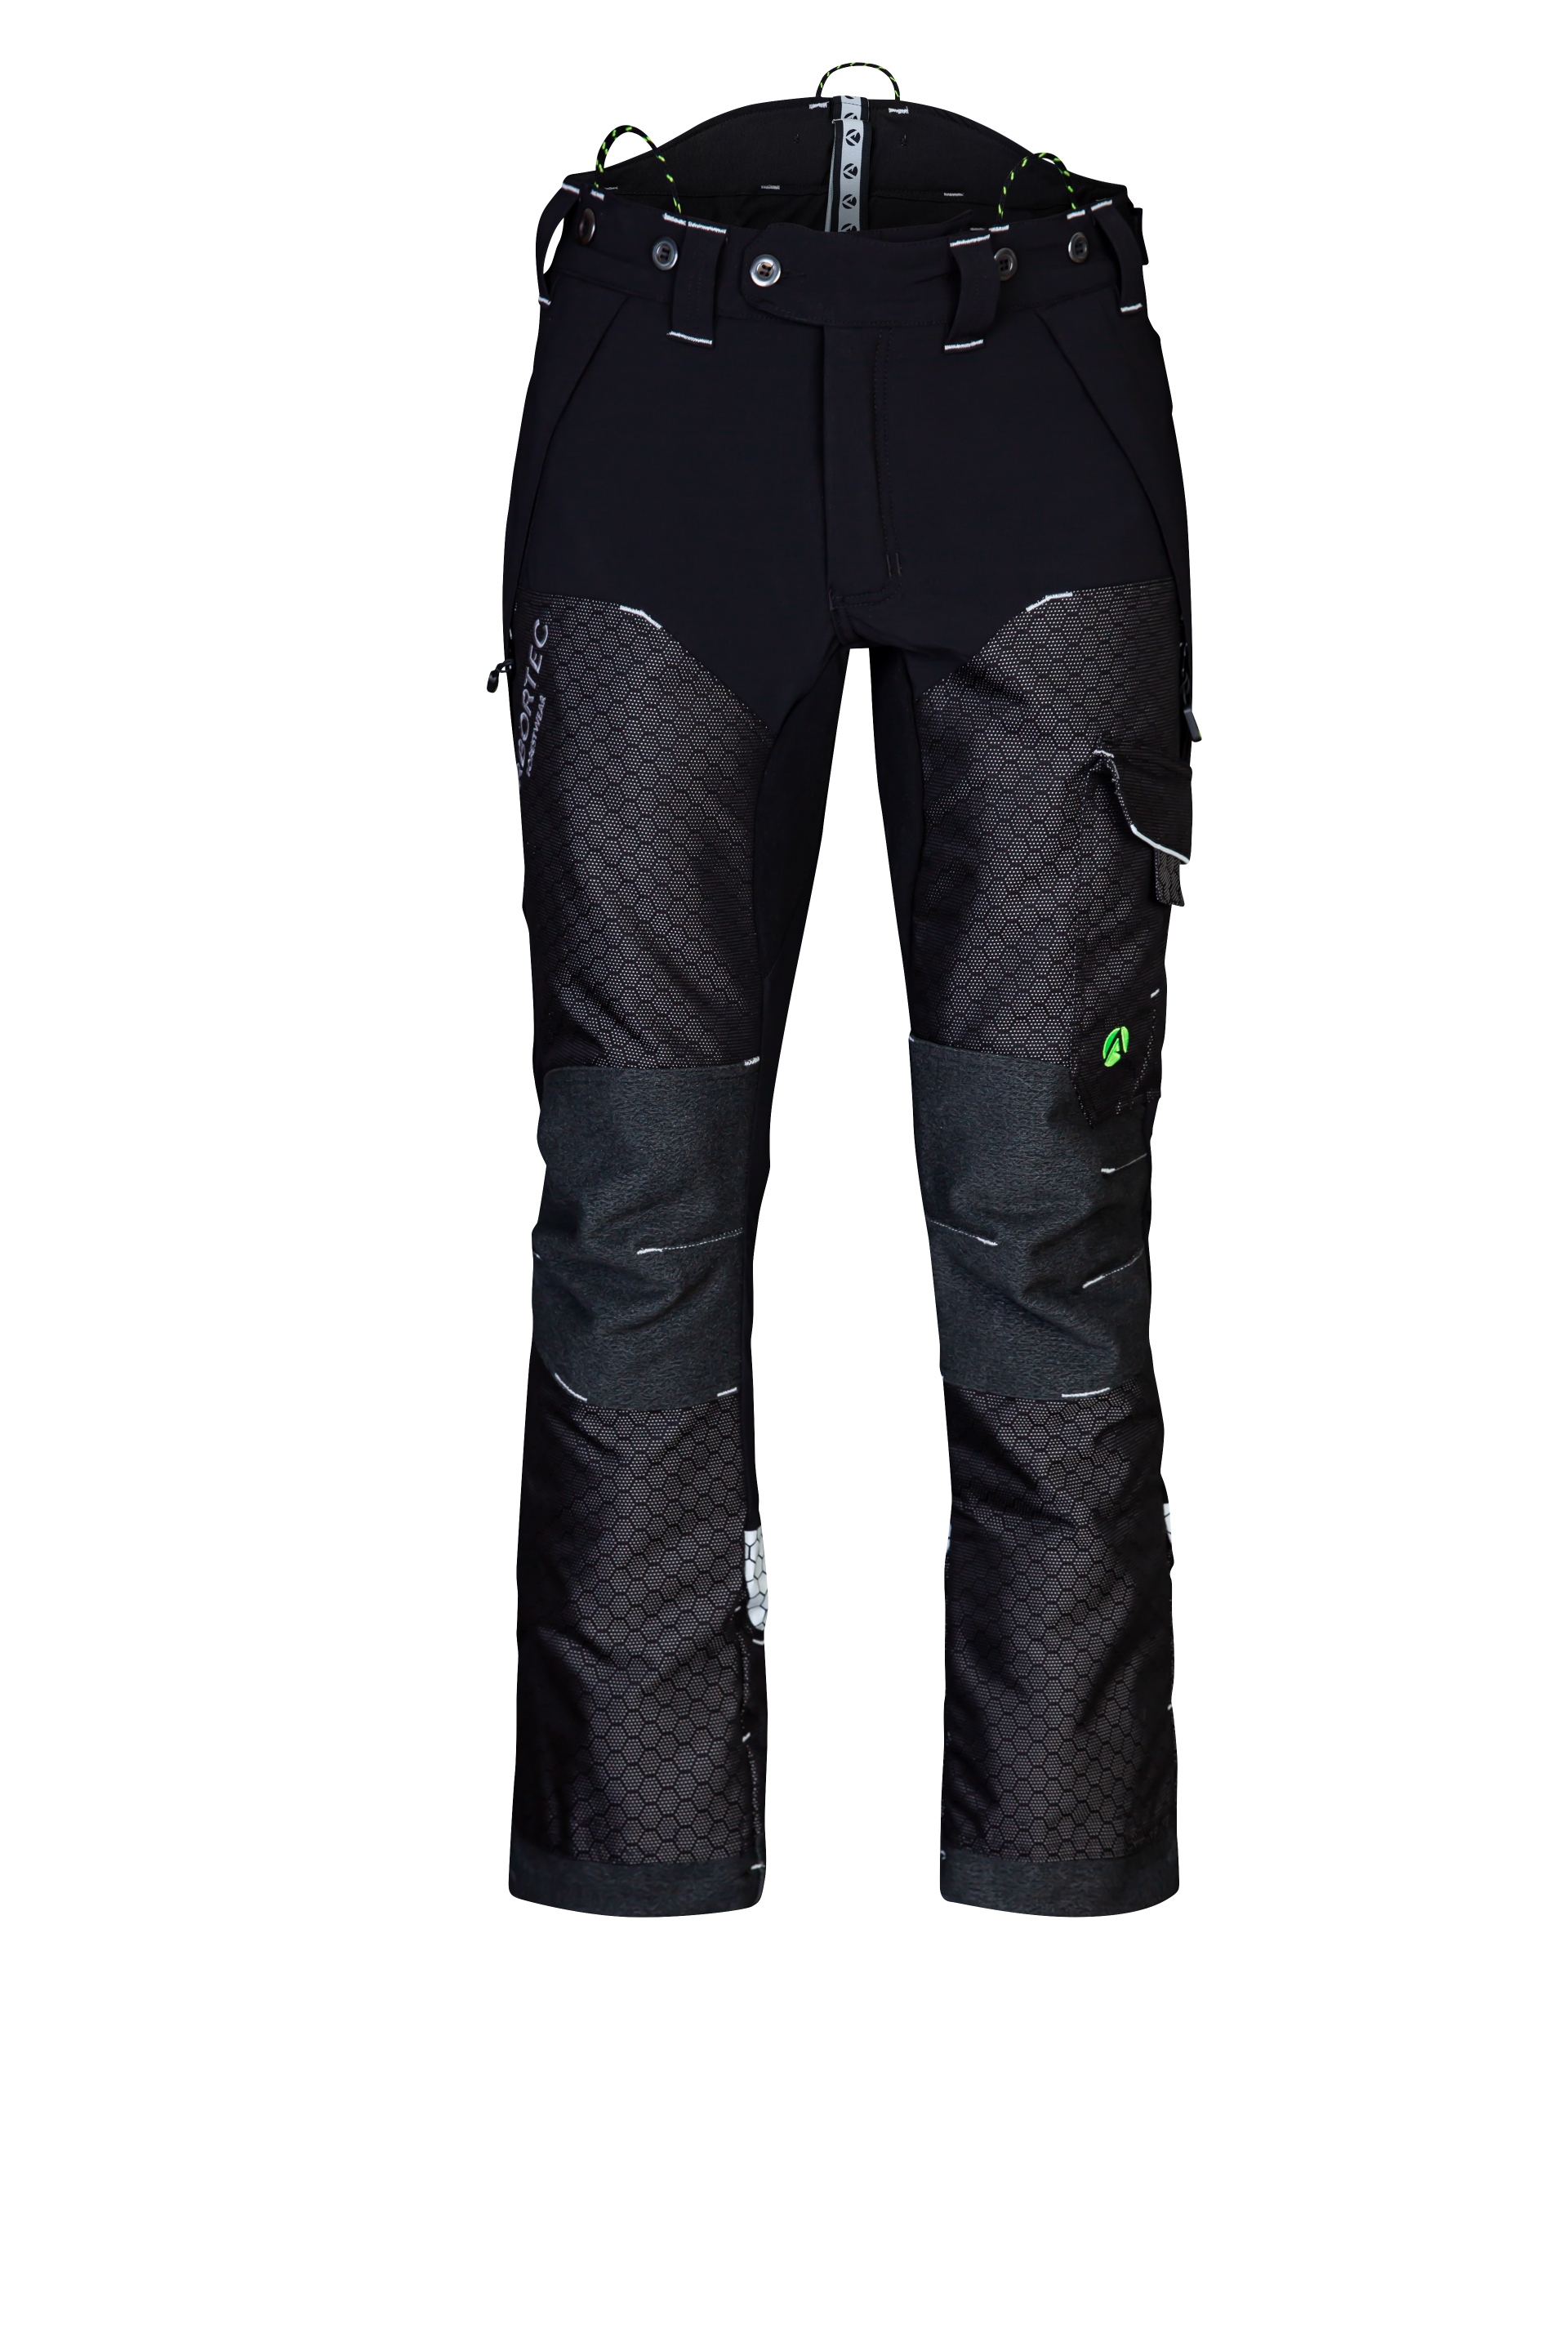 AT4090 - Arbortec Deep Forest Chainsaw Trousers Design C/Class 1 - Black